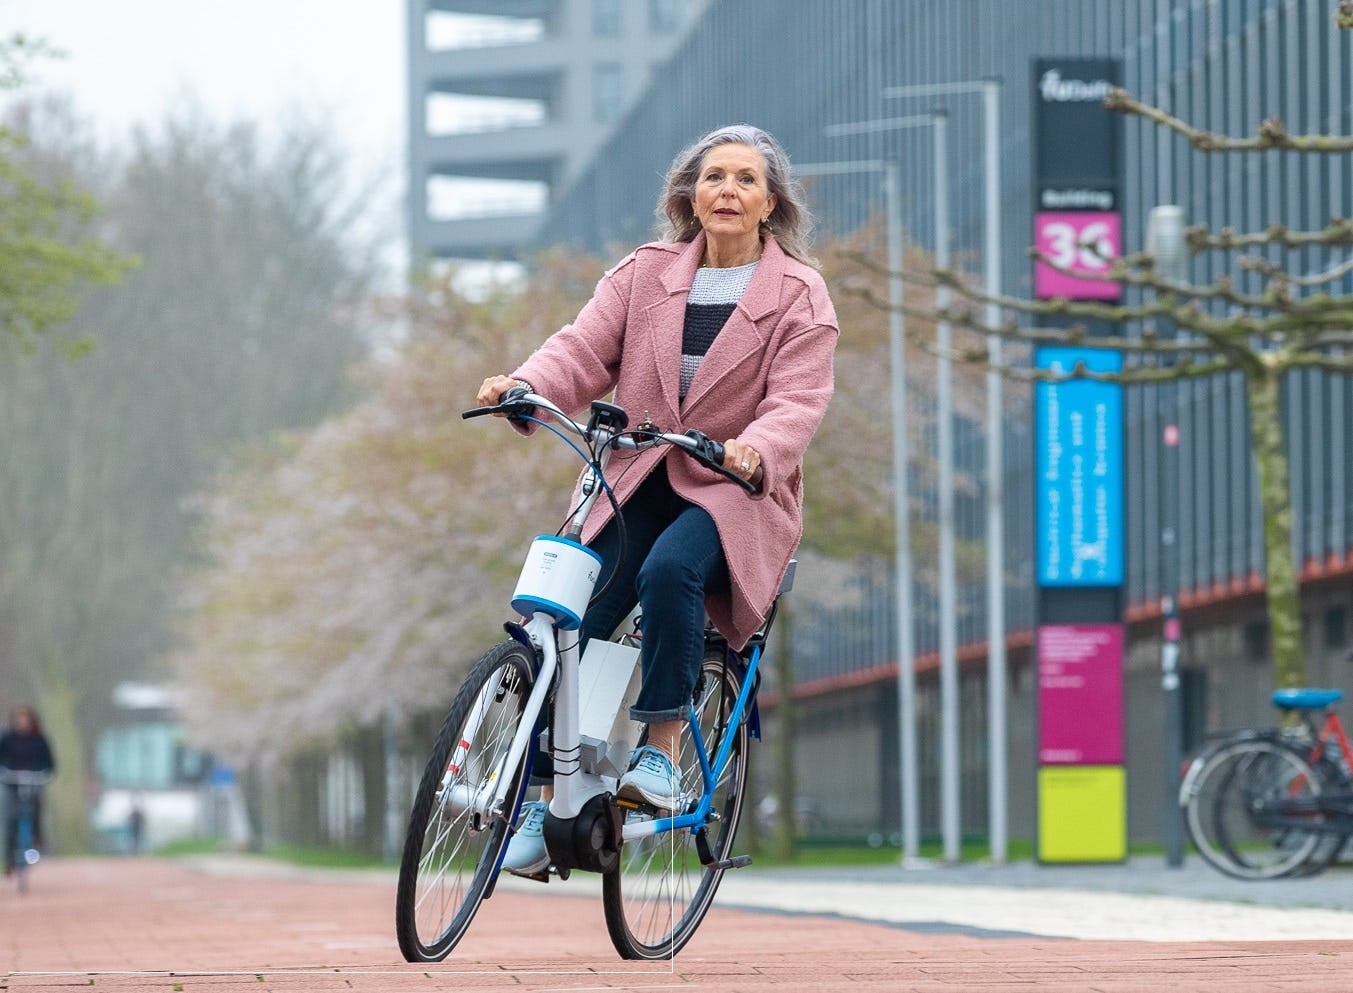 E-bike equipped with steer-assistant function developed at TU Delft Cycling Lab in cooperation with Gazelle. – Photo TU Delft/Gazelle